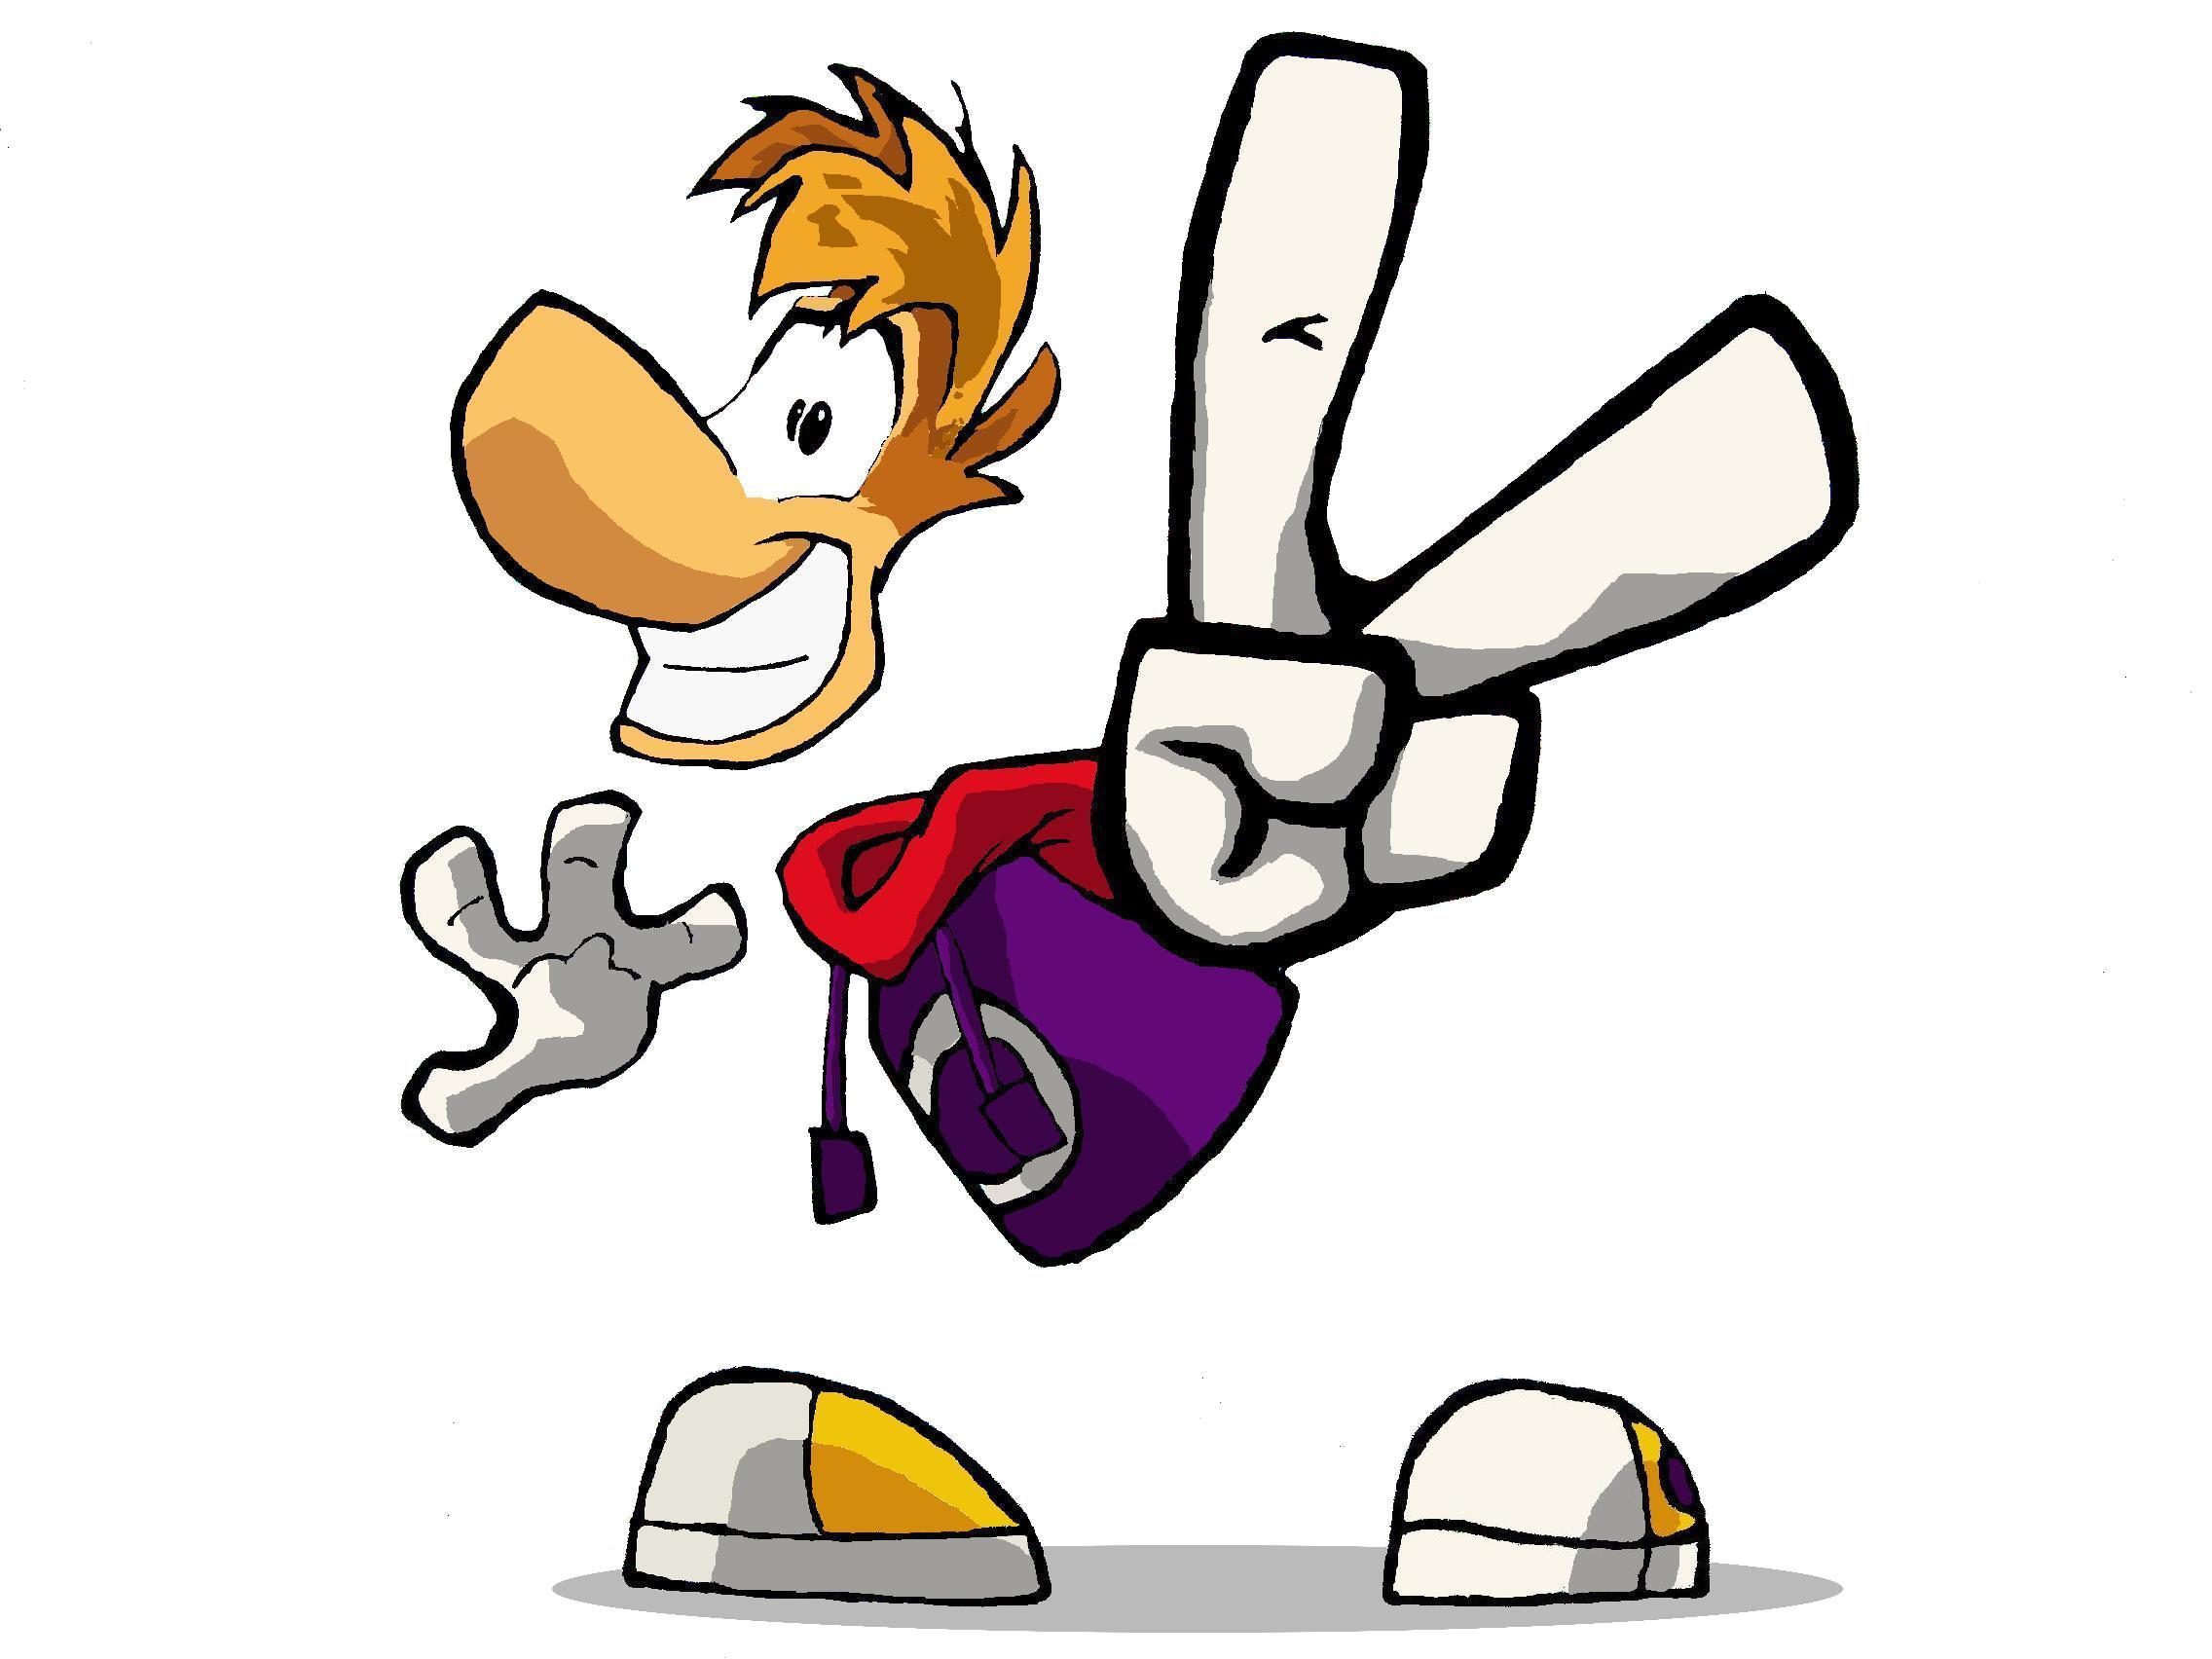 [Image: rayman_from_rayman_origins_by_agnes0177-d4xthou.jpg]